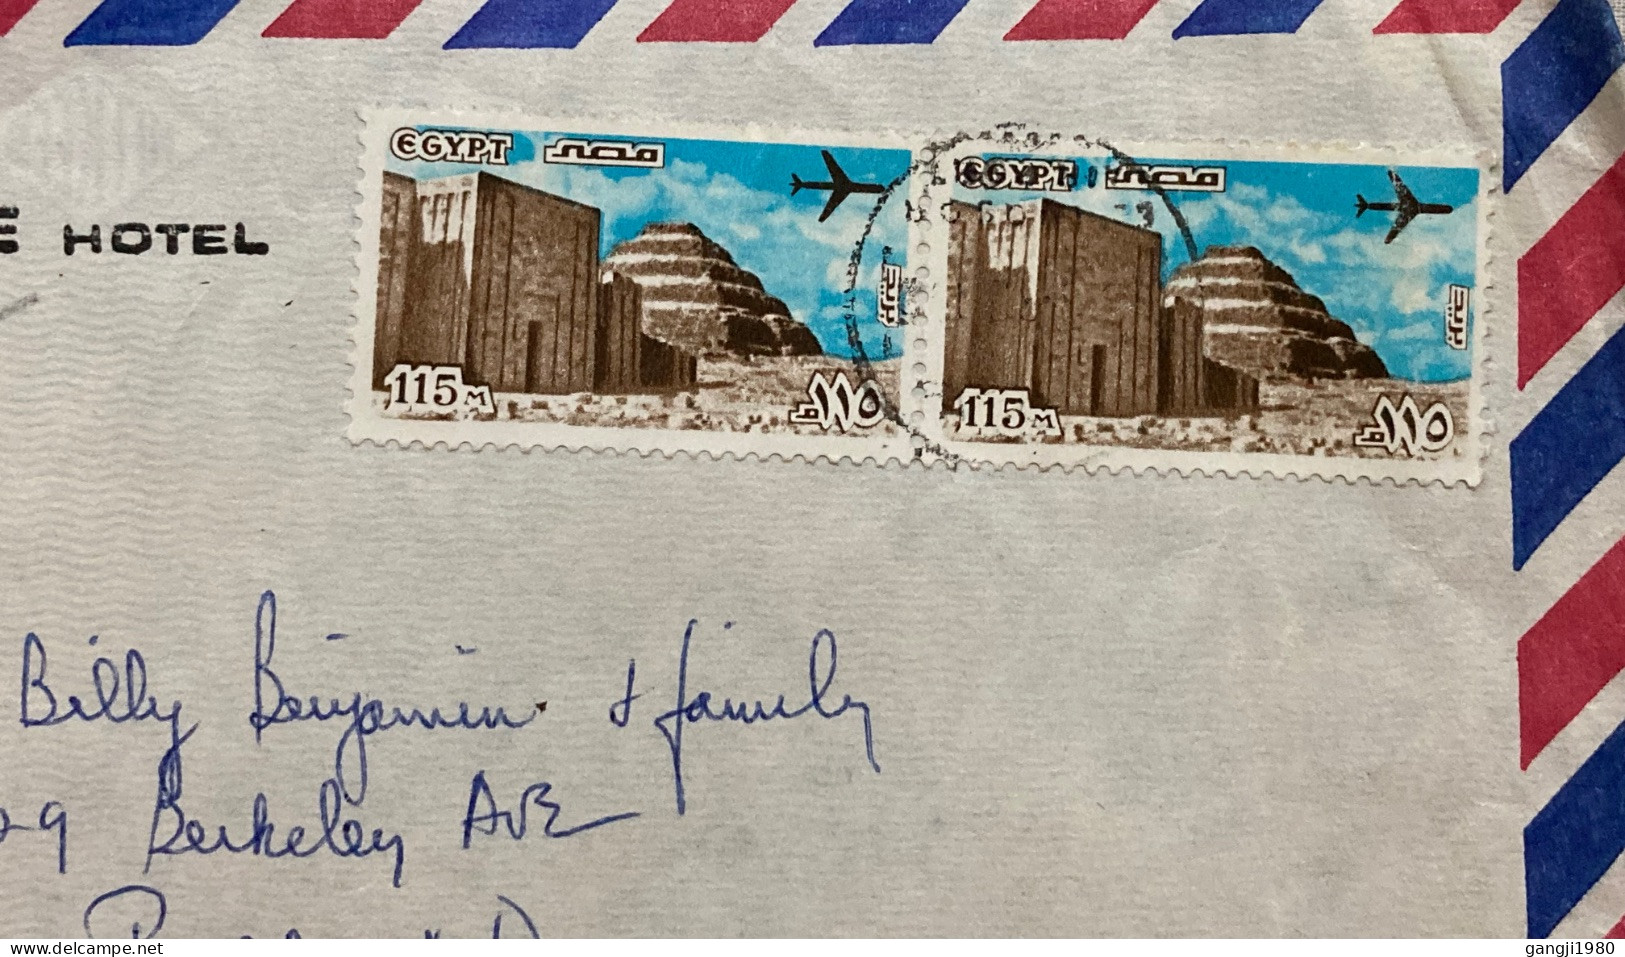 EGYPT 1980, COVER USED TO USA, NEW WINTER PALACE HOTEL, LUXOR, 2 STAMP, PYRAMID, AEROPLANE, ARCHELOGY, BUILDING, HERITAG - Cartas & Documentos